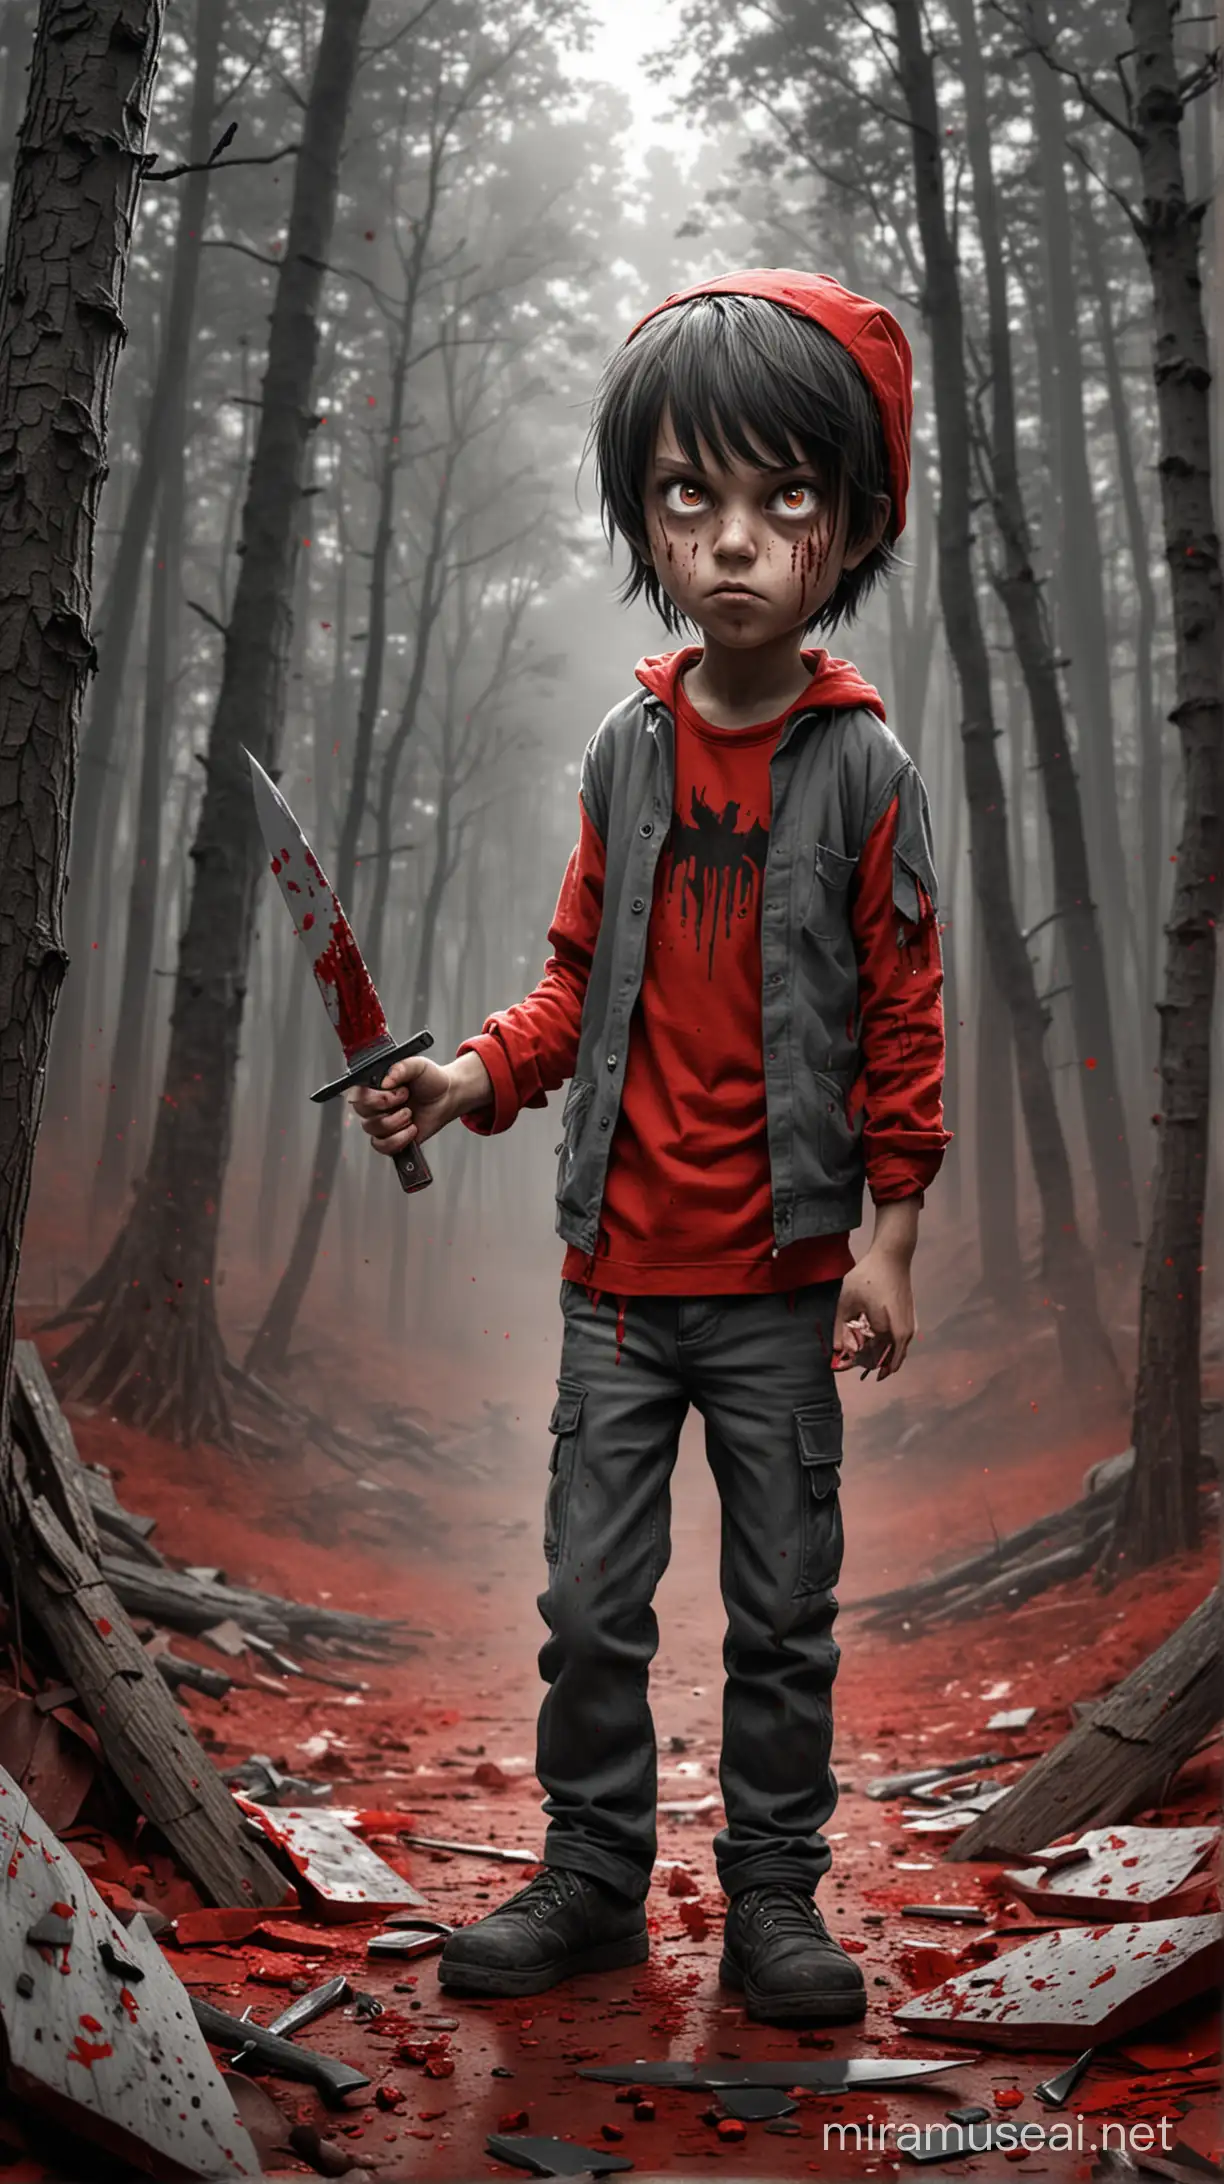 Sinister Child with Knife in Forest Cartoon Terror Scene with Blood and Cardboard